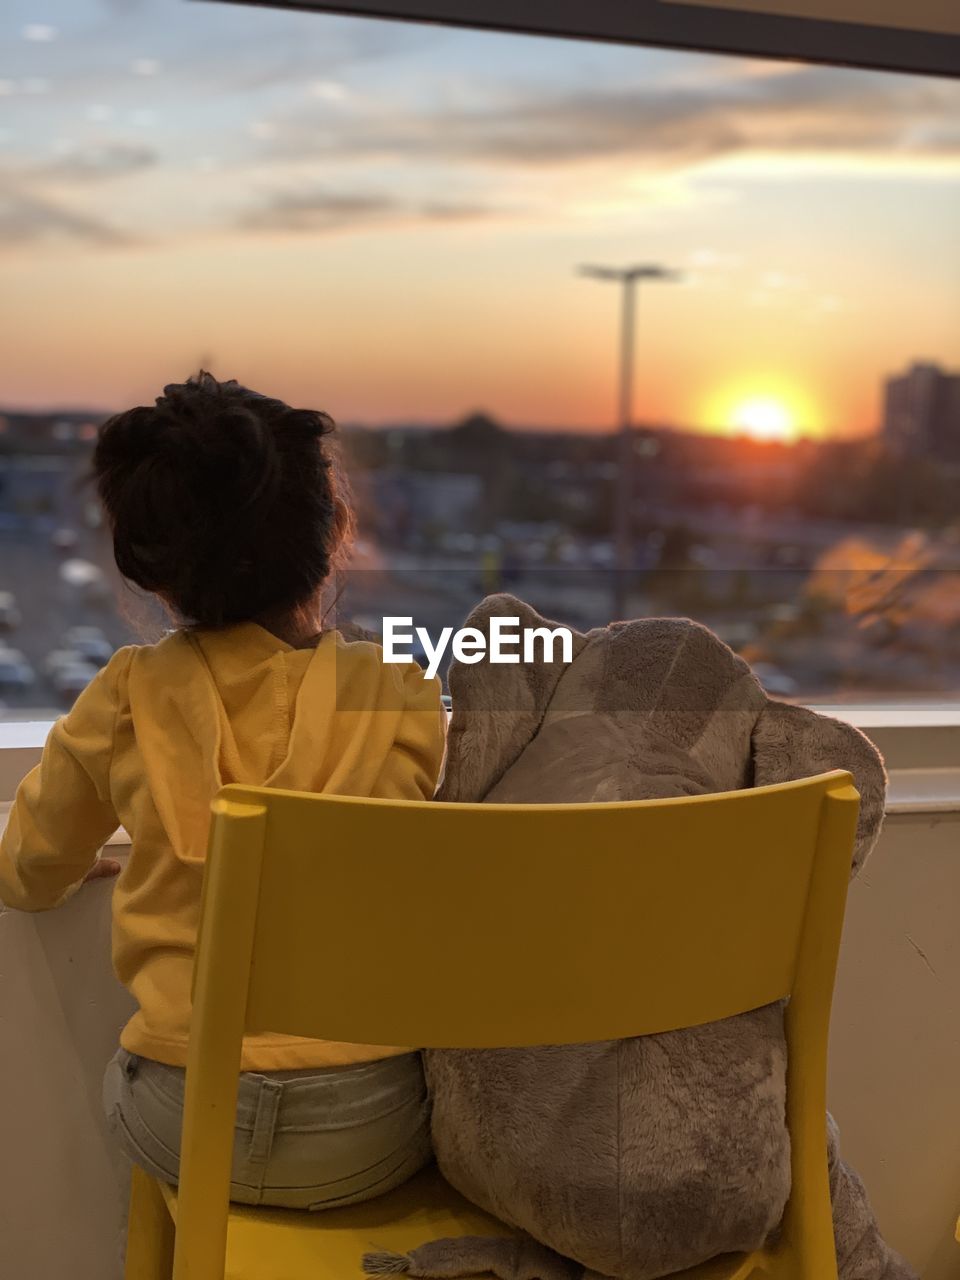 A child watching the sunset next to her doll